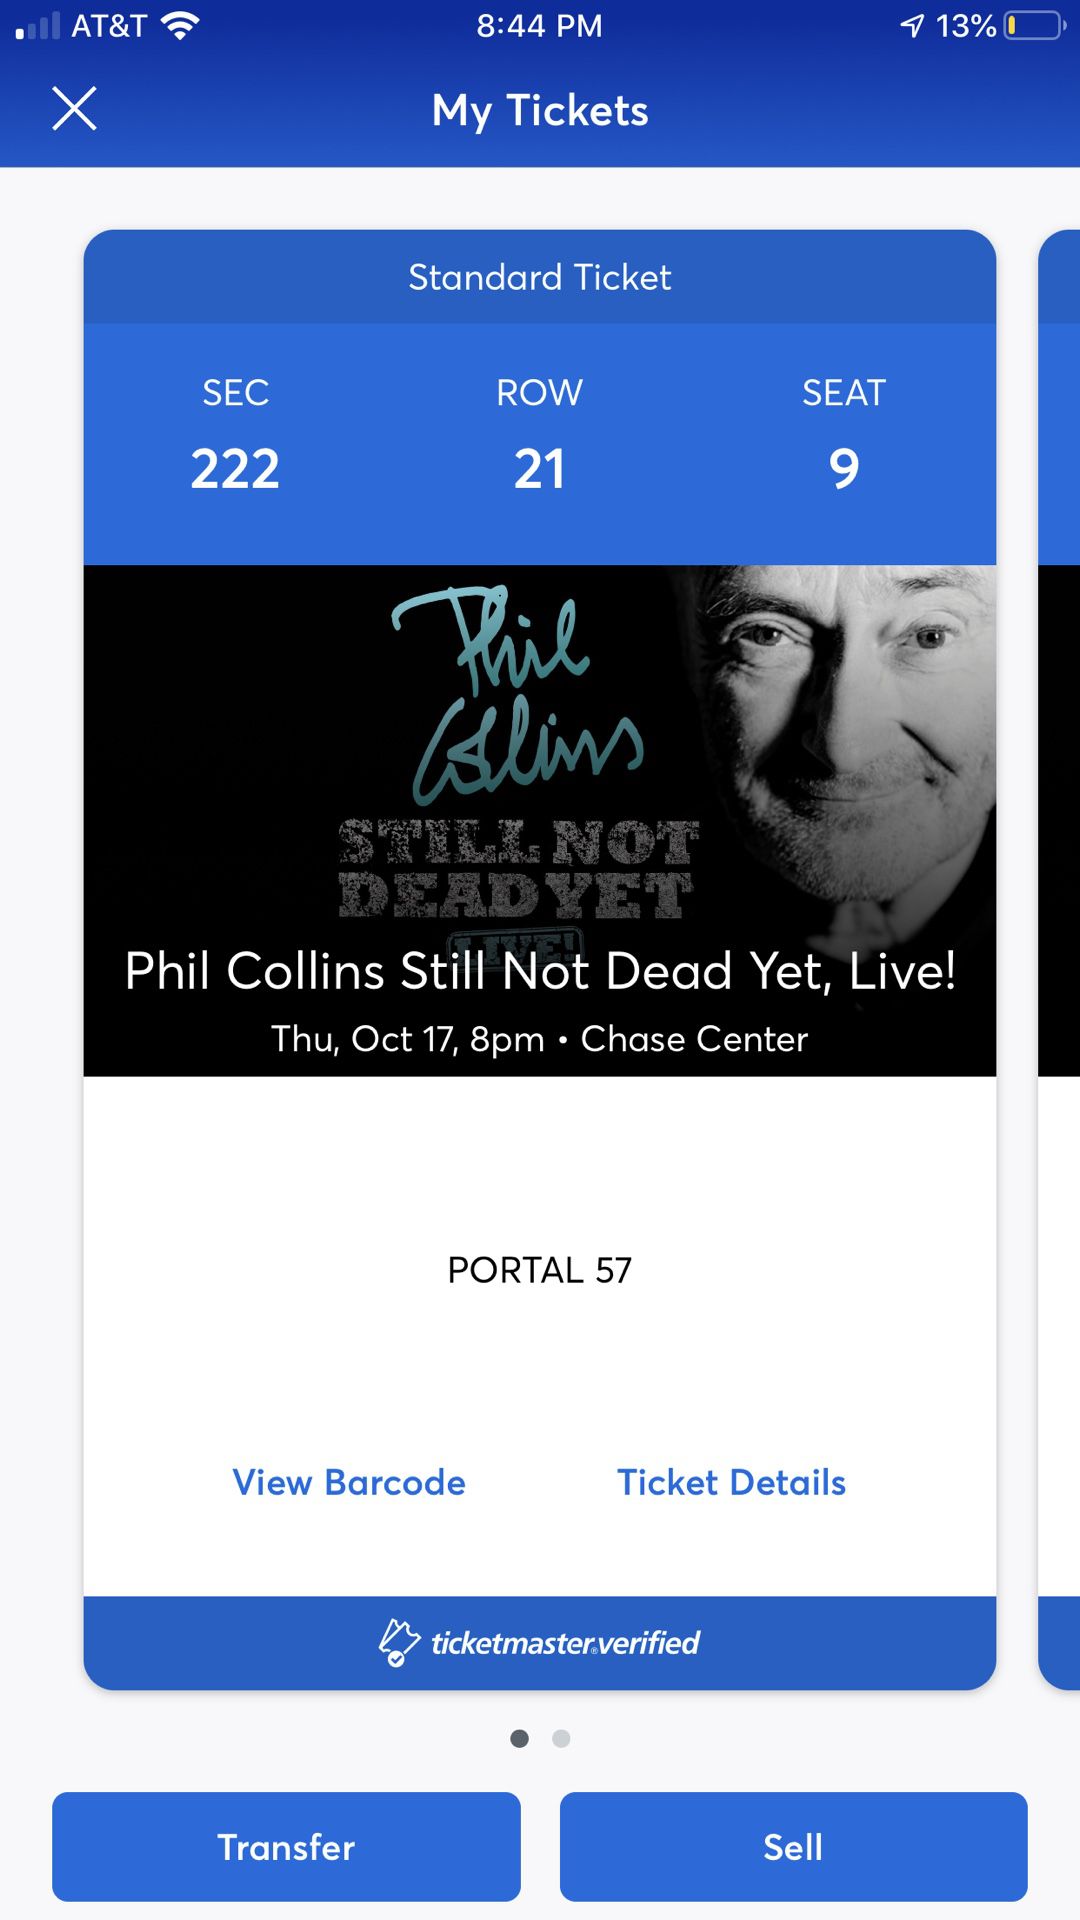 Phil Collins “still not dead yet” chase center oct 17th